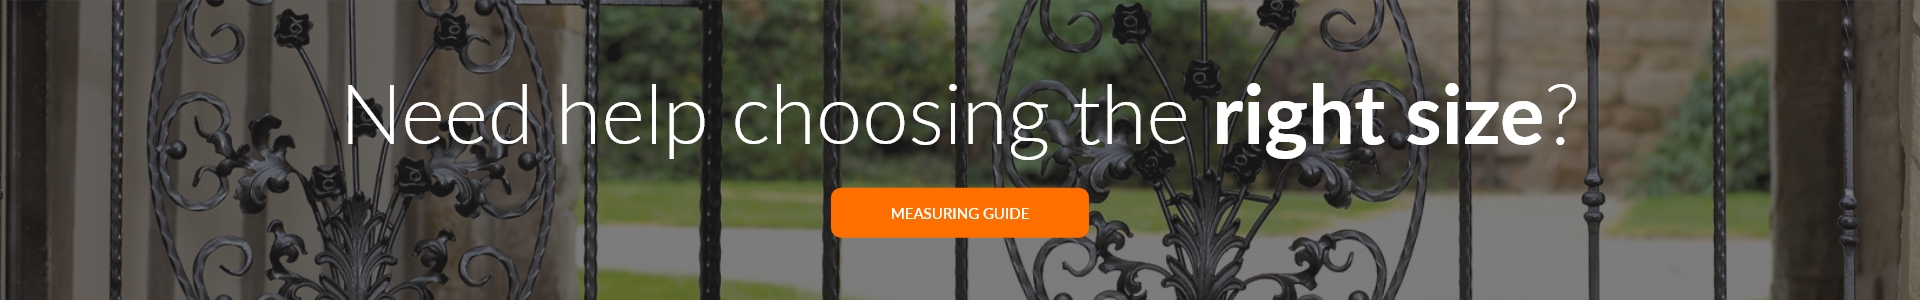 Read the measuring guide for help with sizes